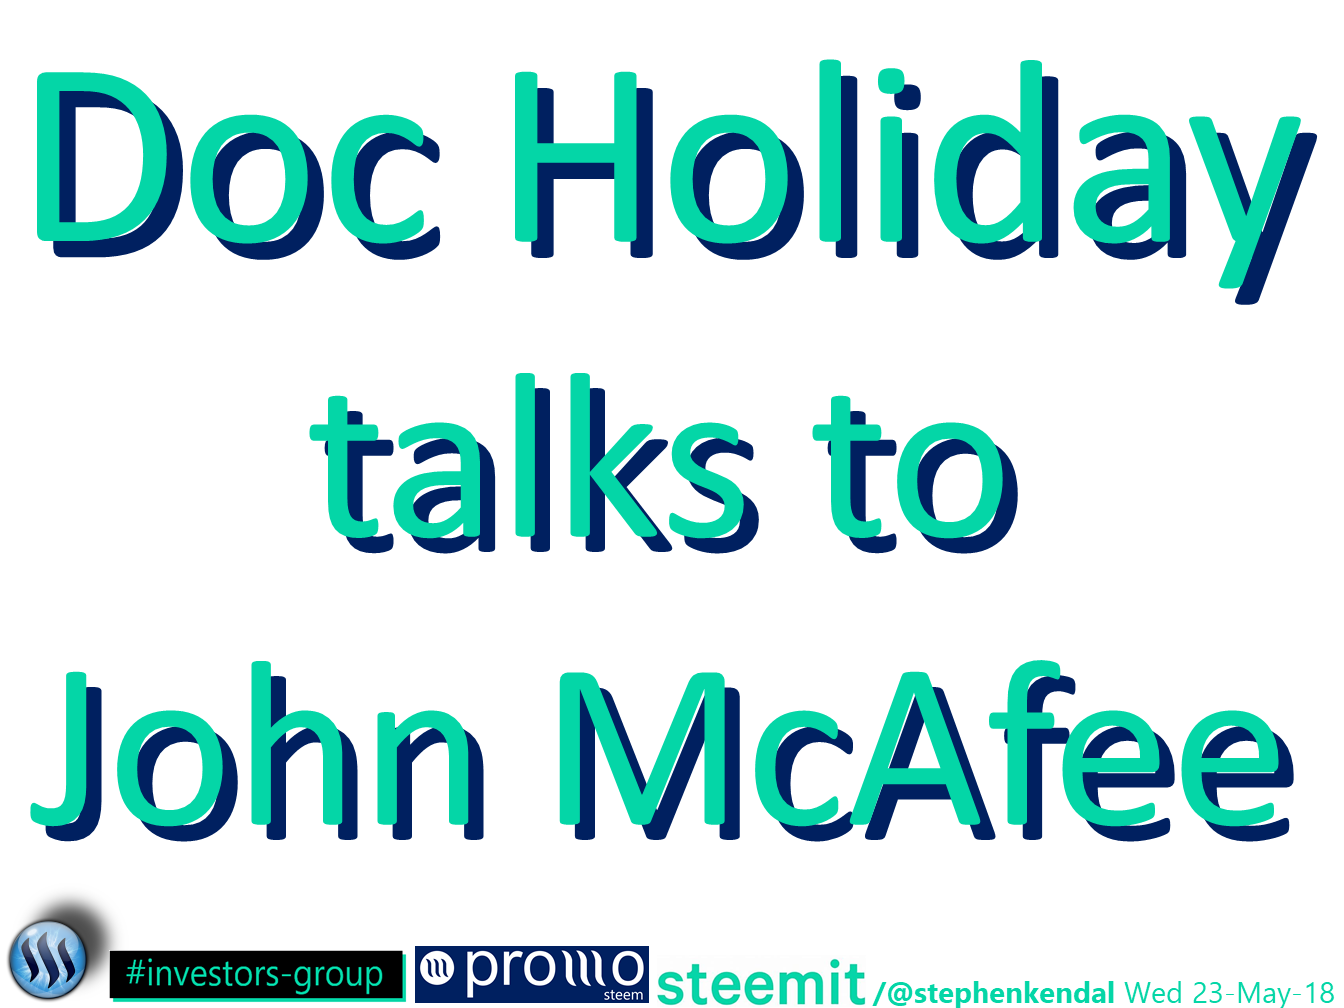 Doc Holiday talks to John McAfee.png